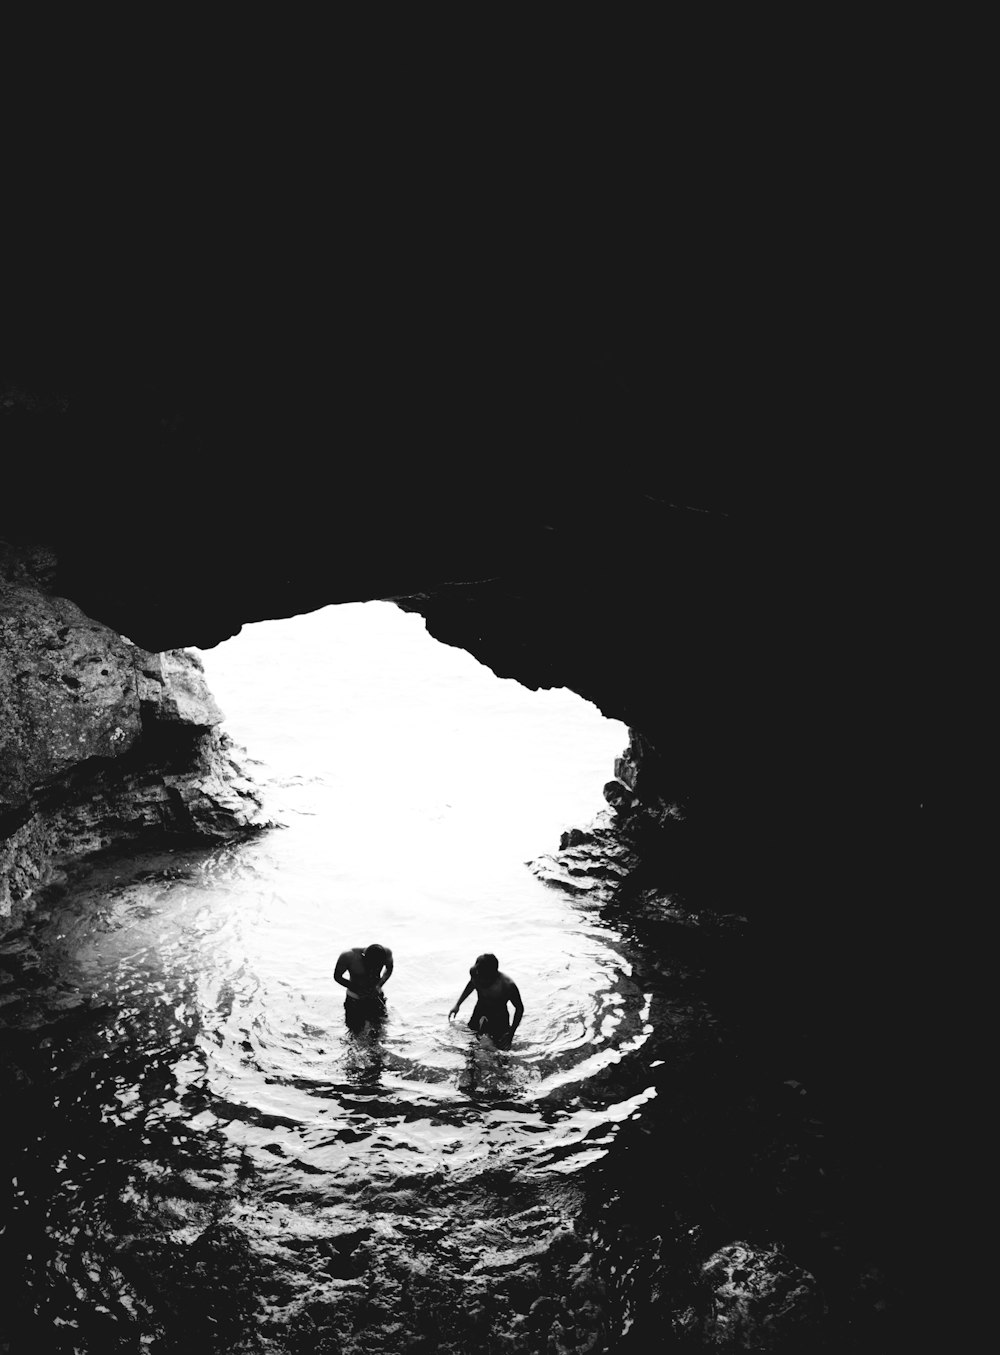 grayscale photo of two men in cave with body of water